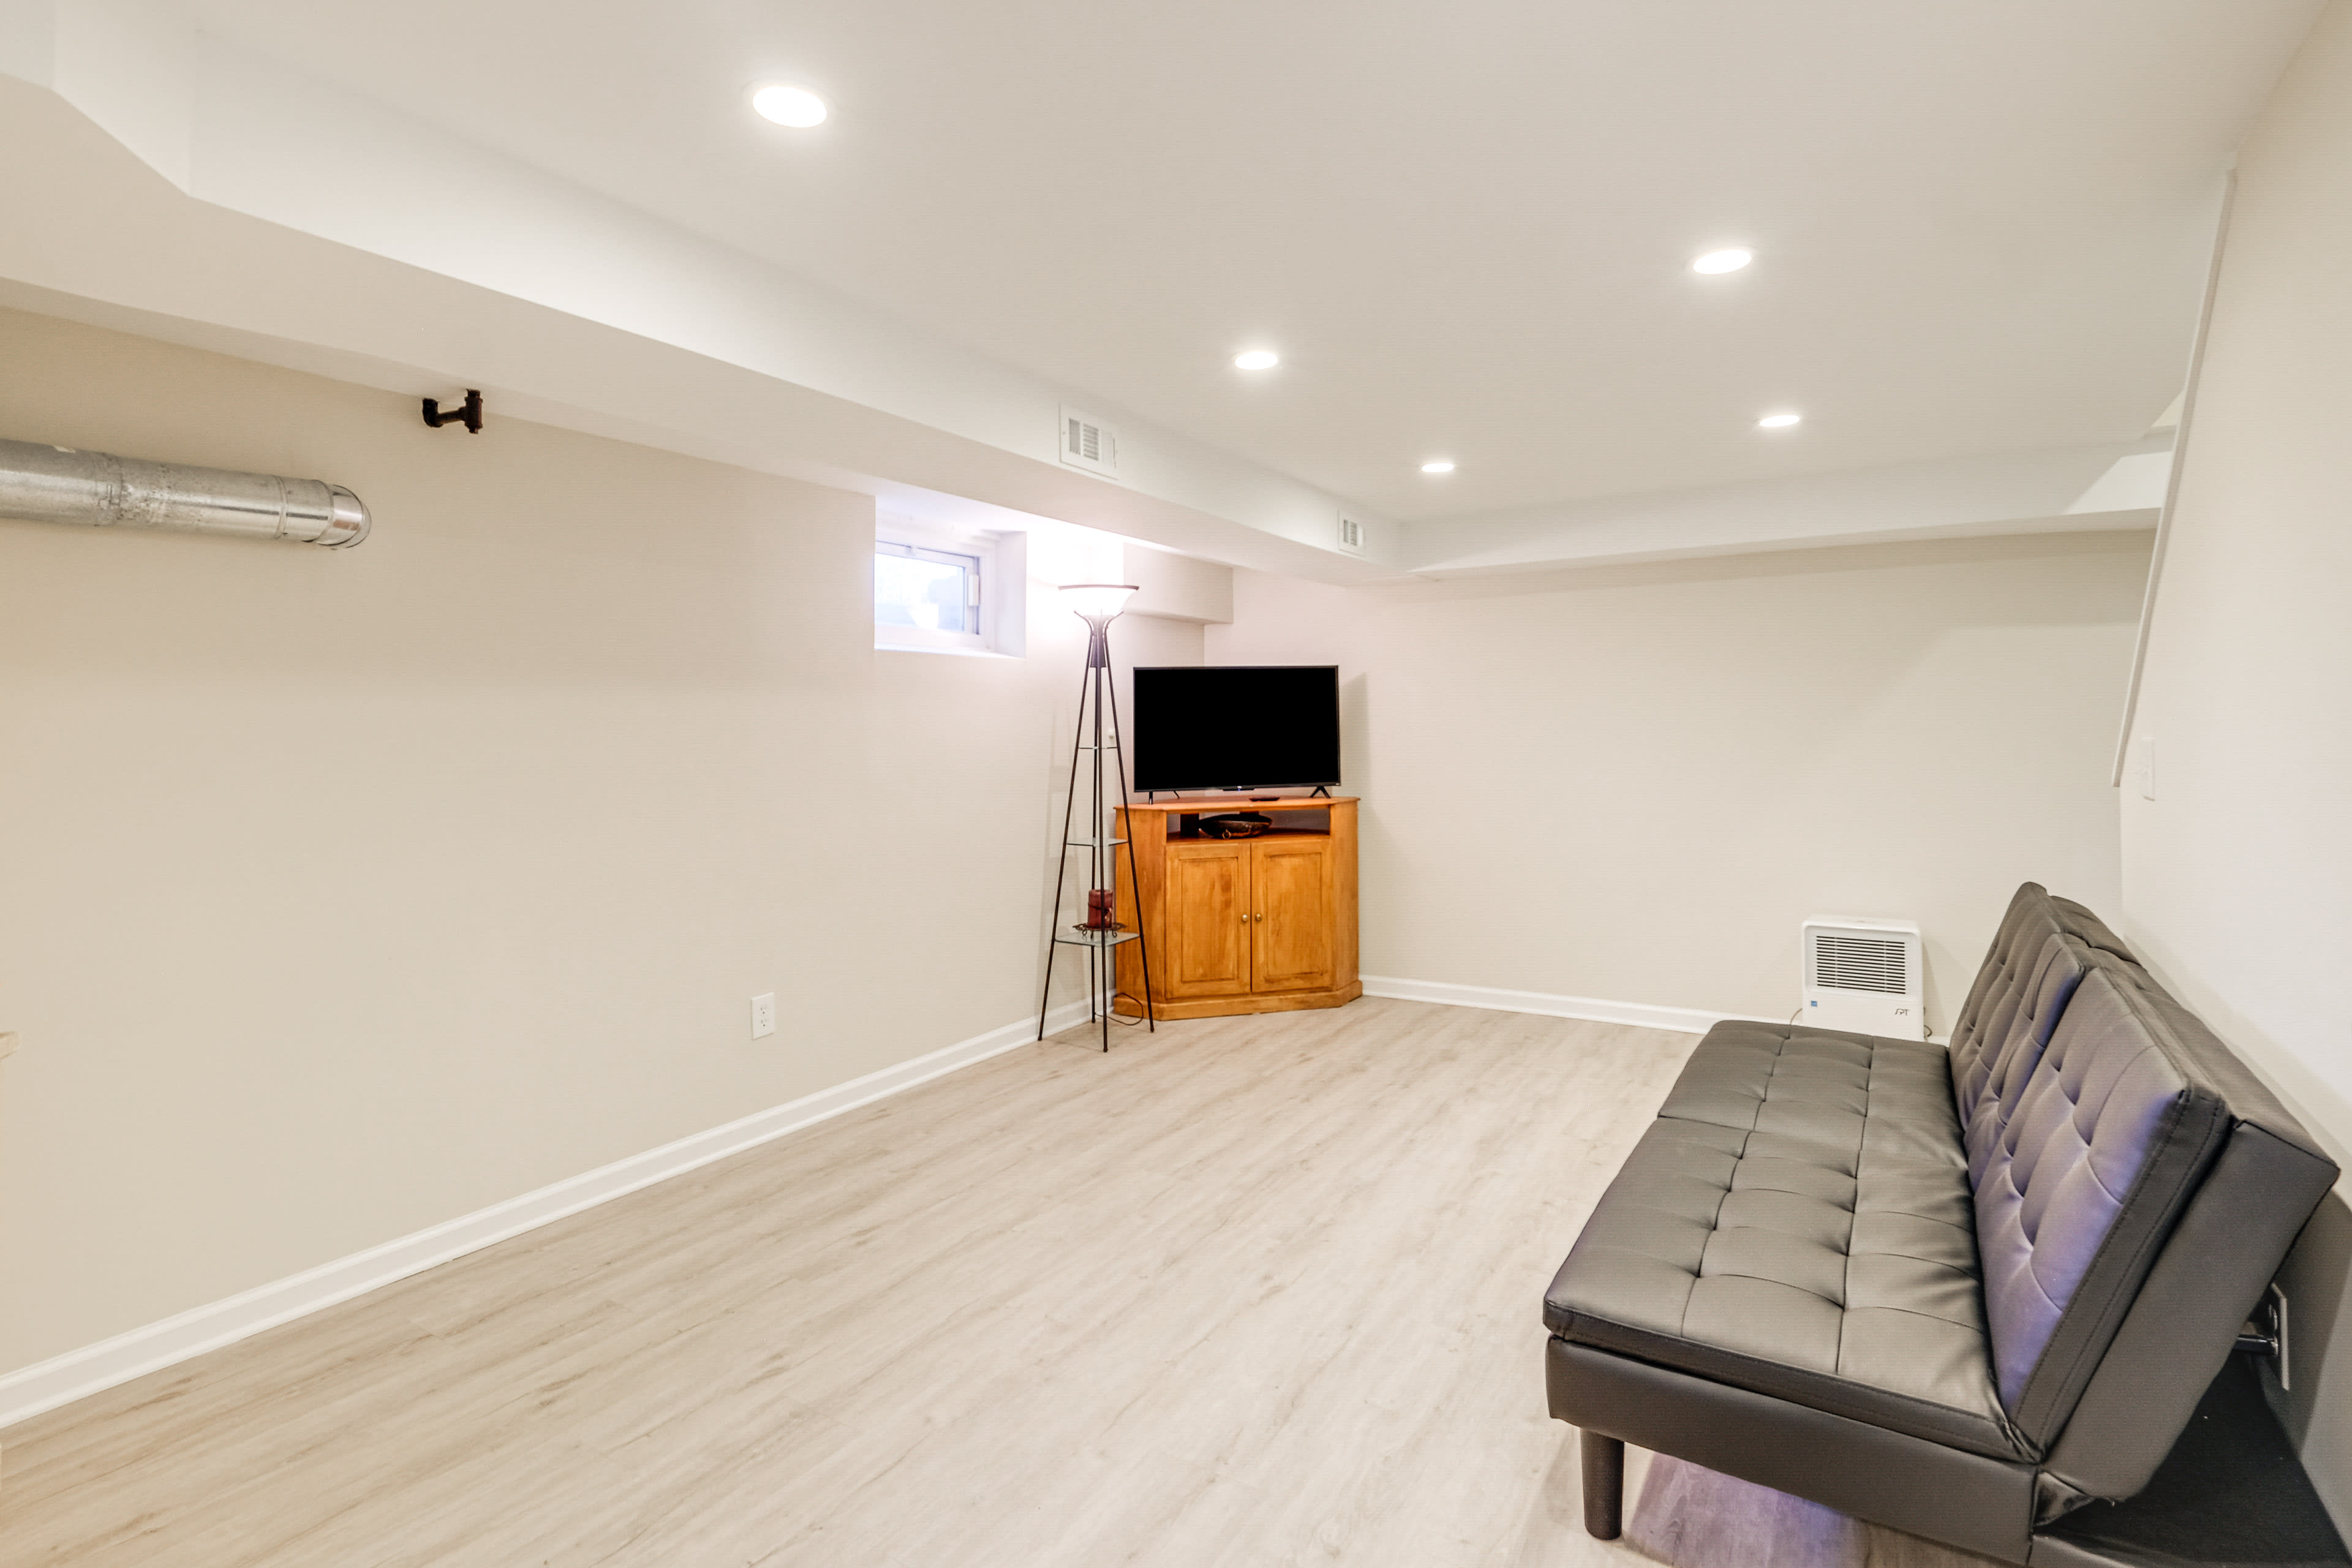 Basement Living Room | Full Futon | Stairs Required